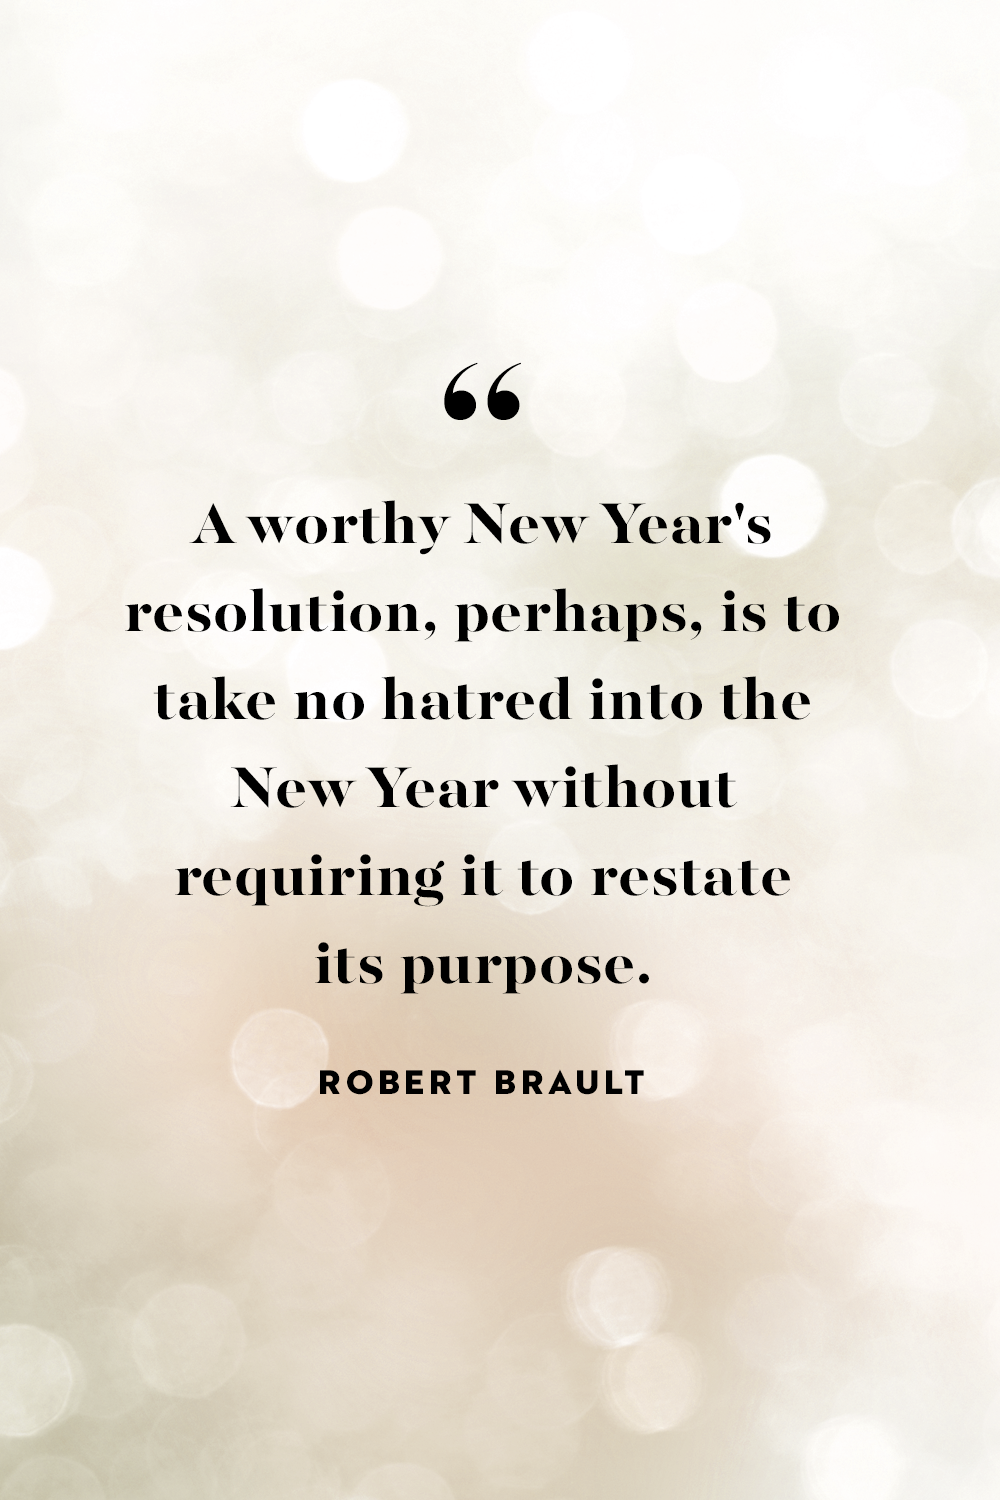 new year resolution quotes